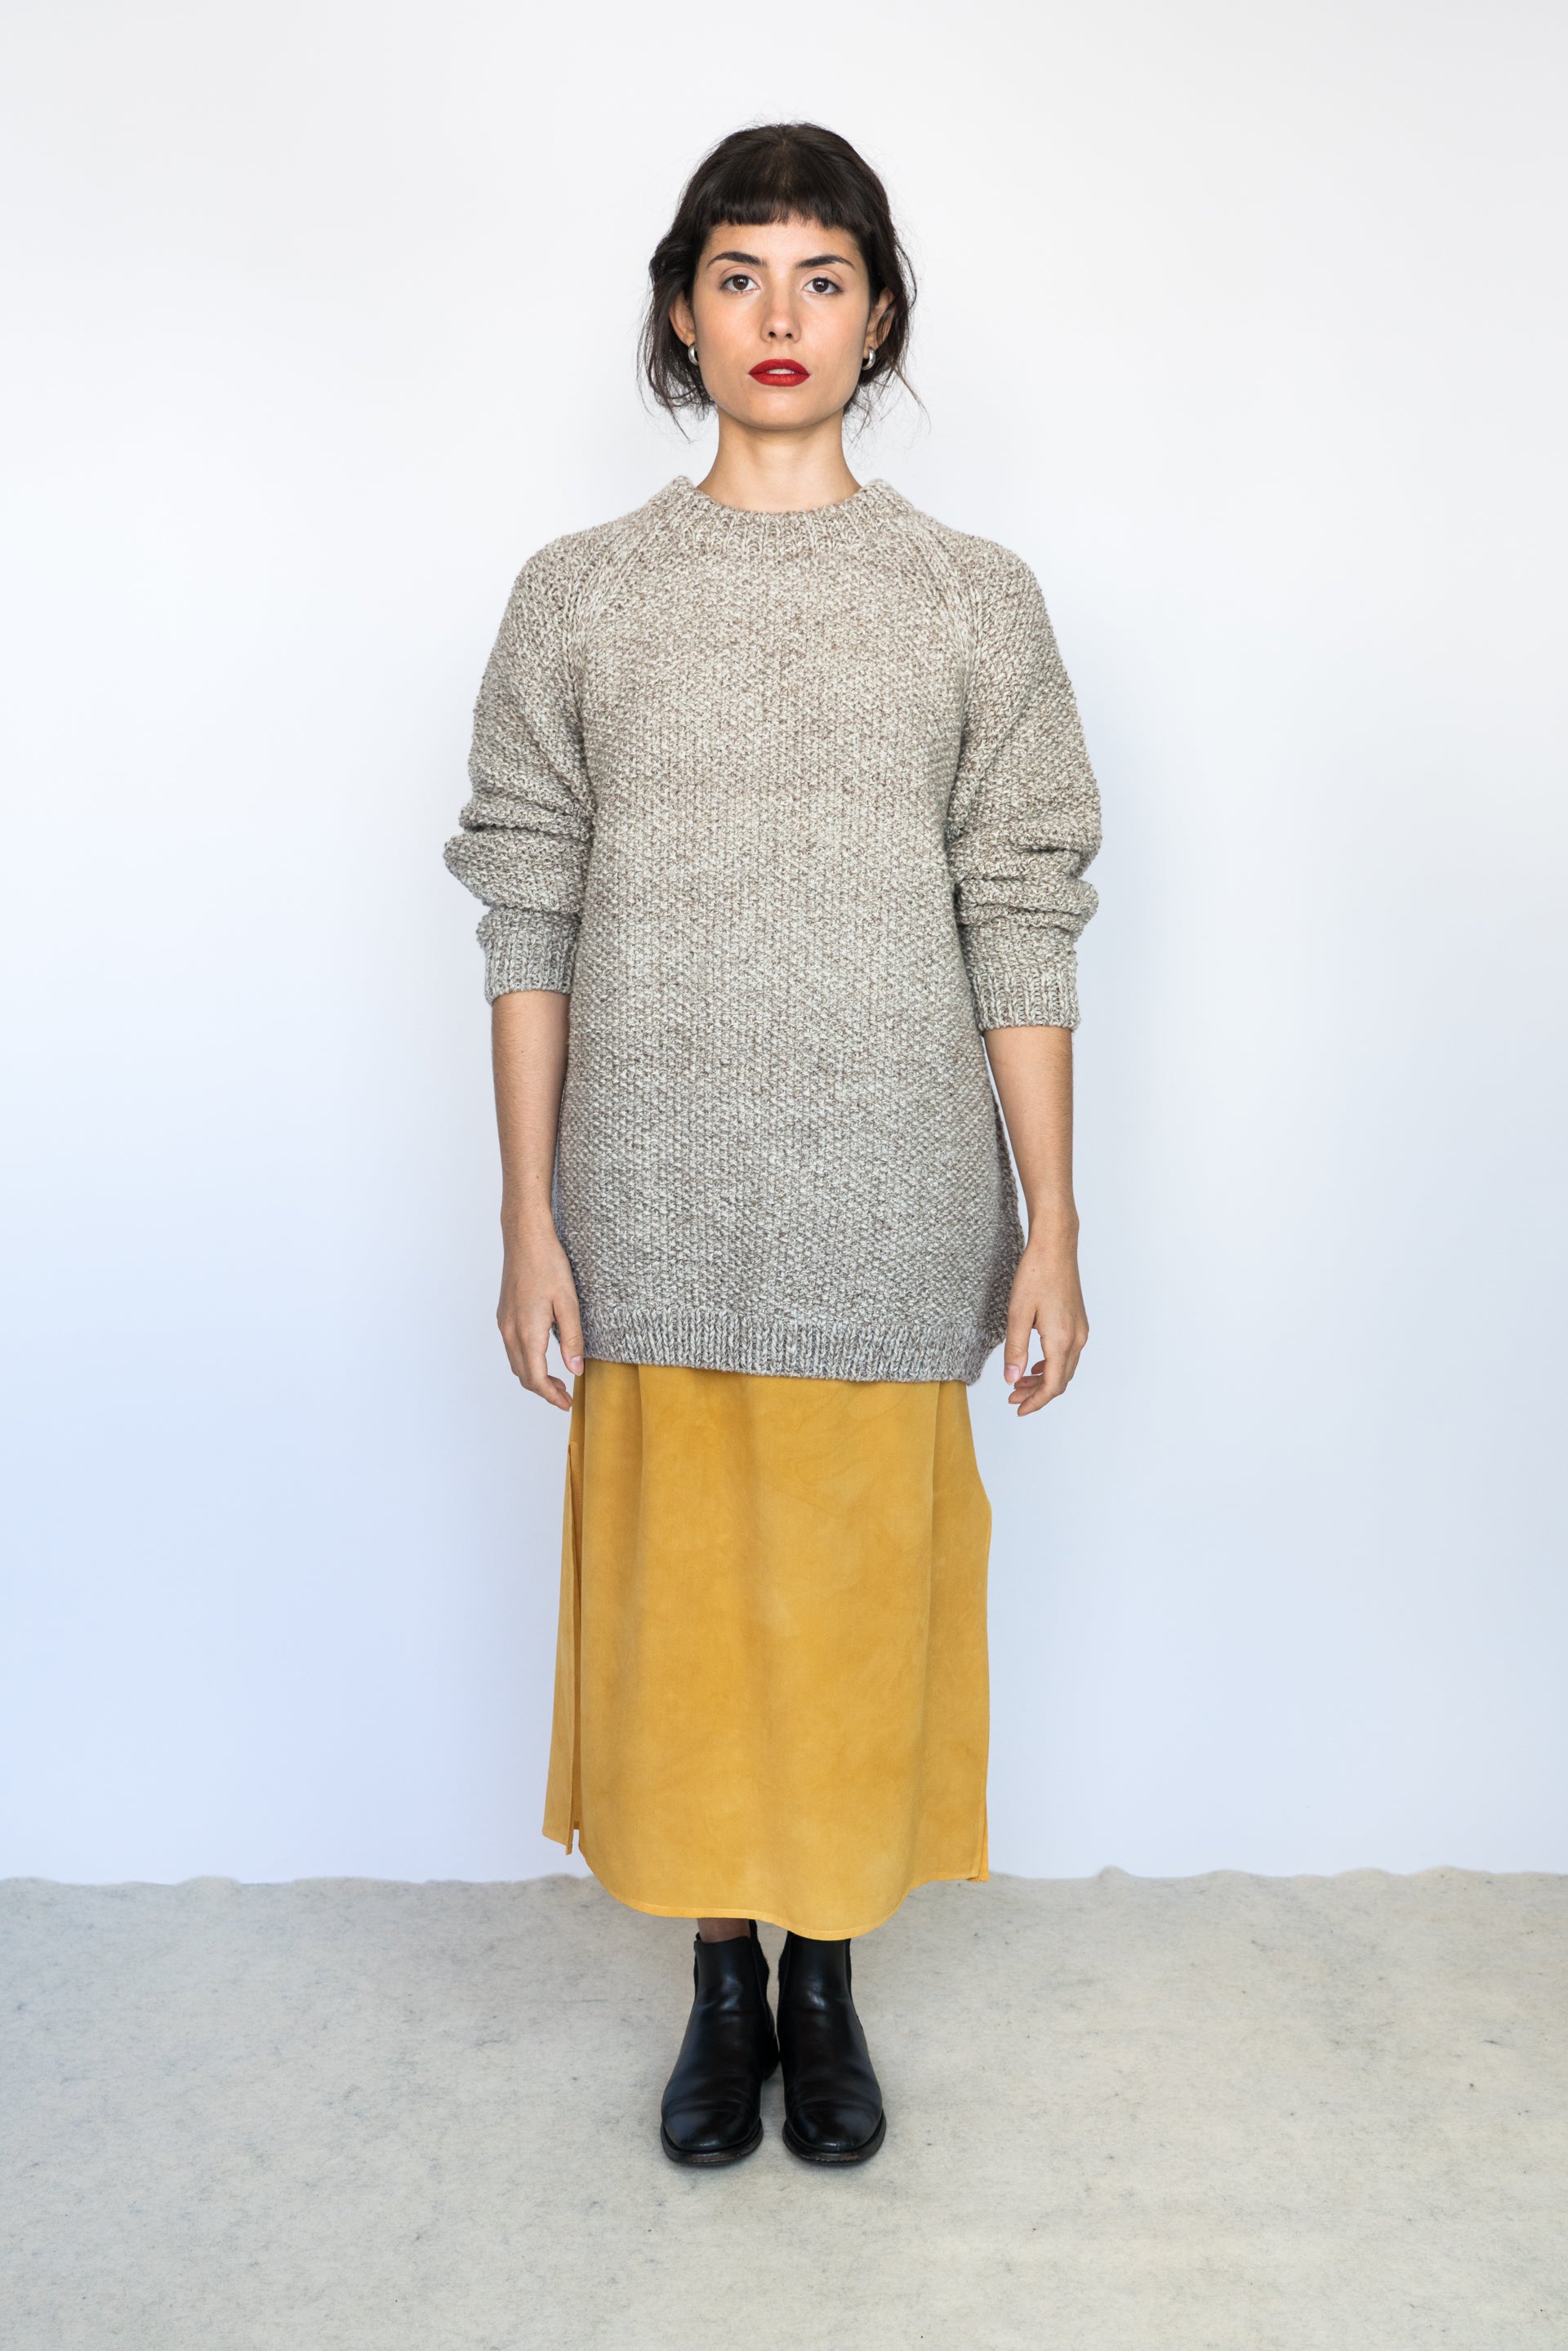 HAND KNITTED WOOL JUMPER ROBLE - STONE